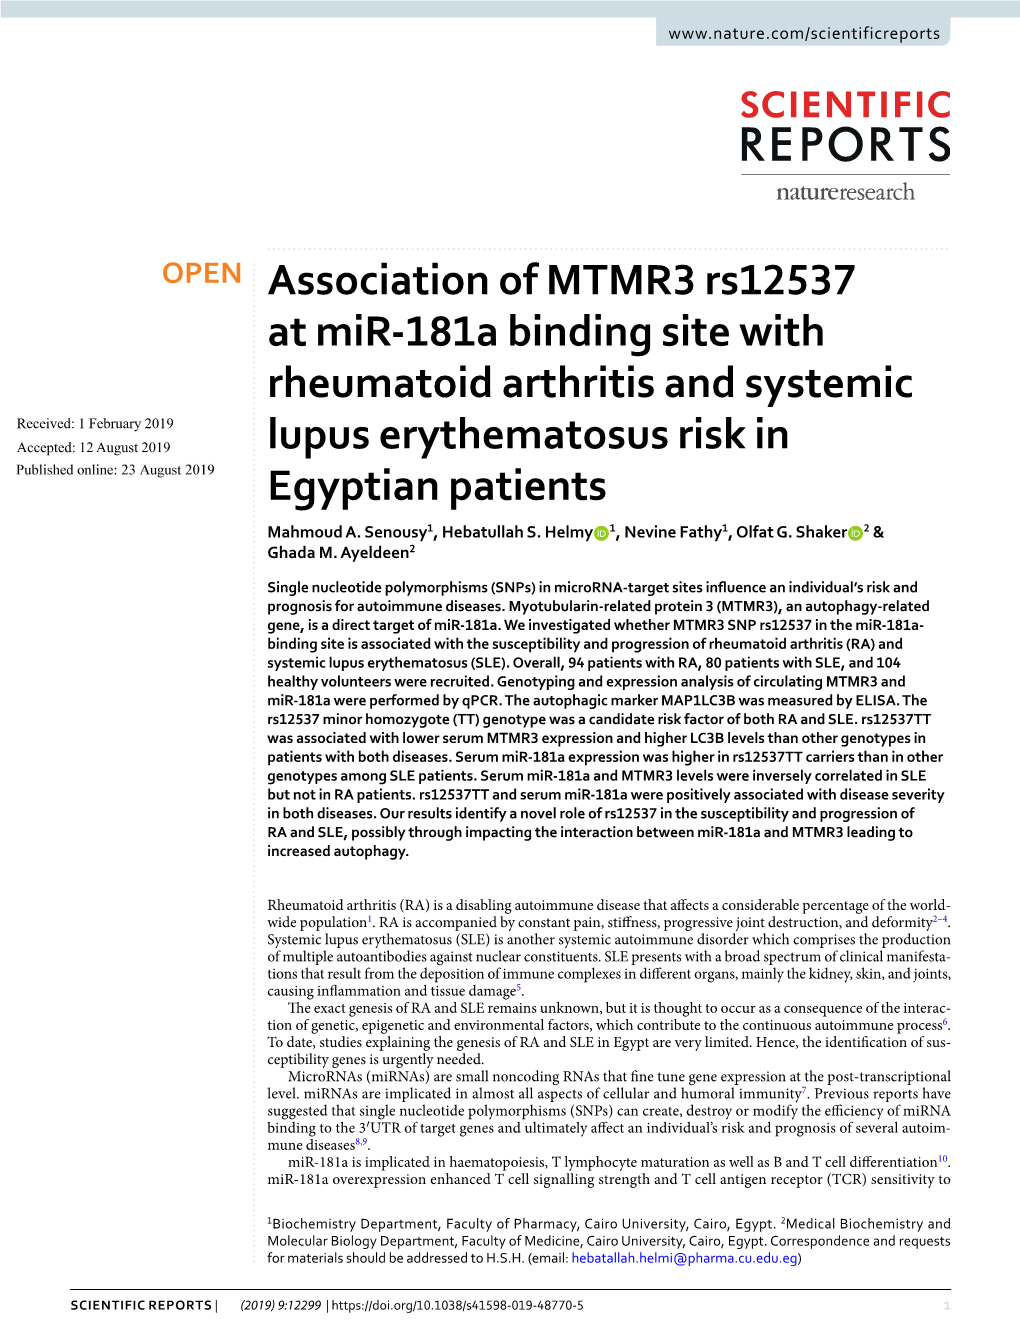 Association of MTMR3 Rs12537 at Mir-181A Binding Site with Rheumatoid